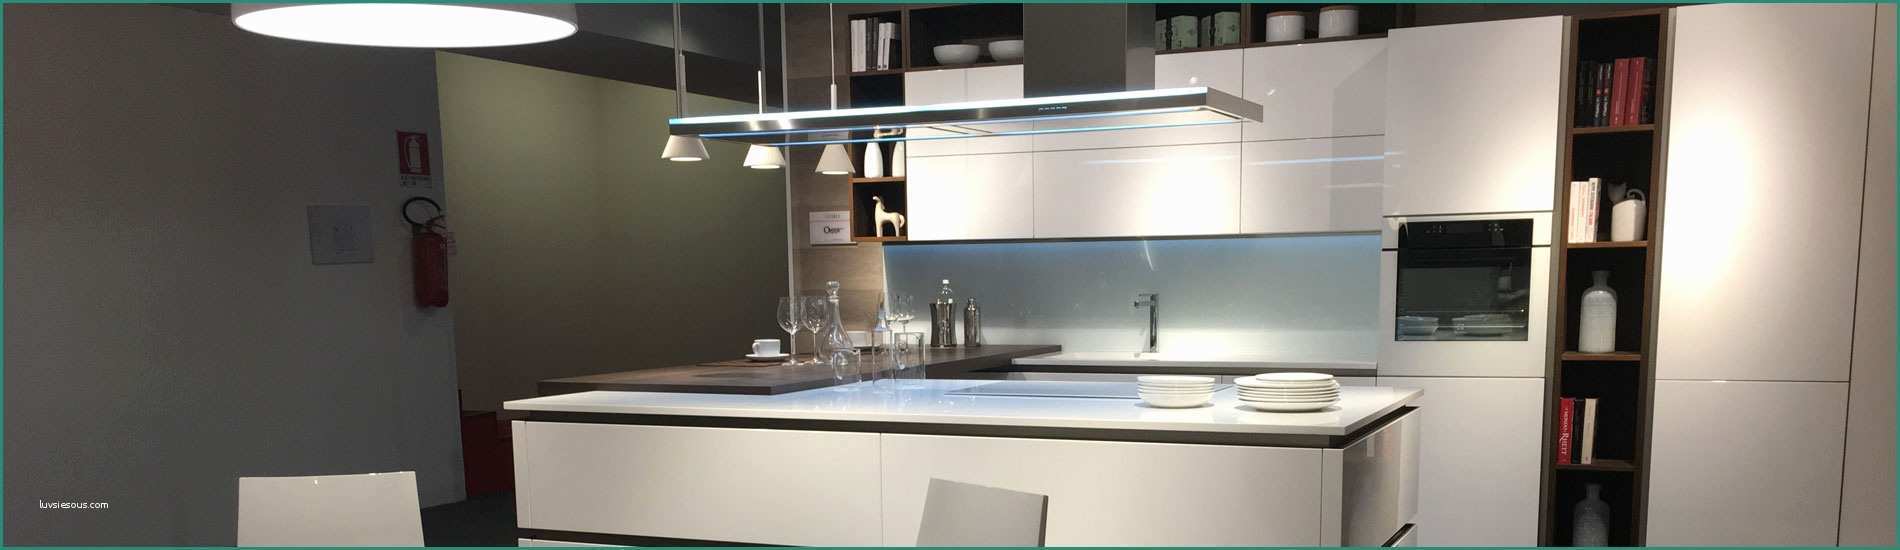 Asselle Mobili Cucine E asselle Mobili Cucine nori Arredamenti Outlet with